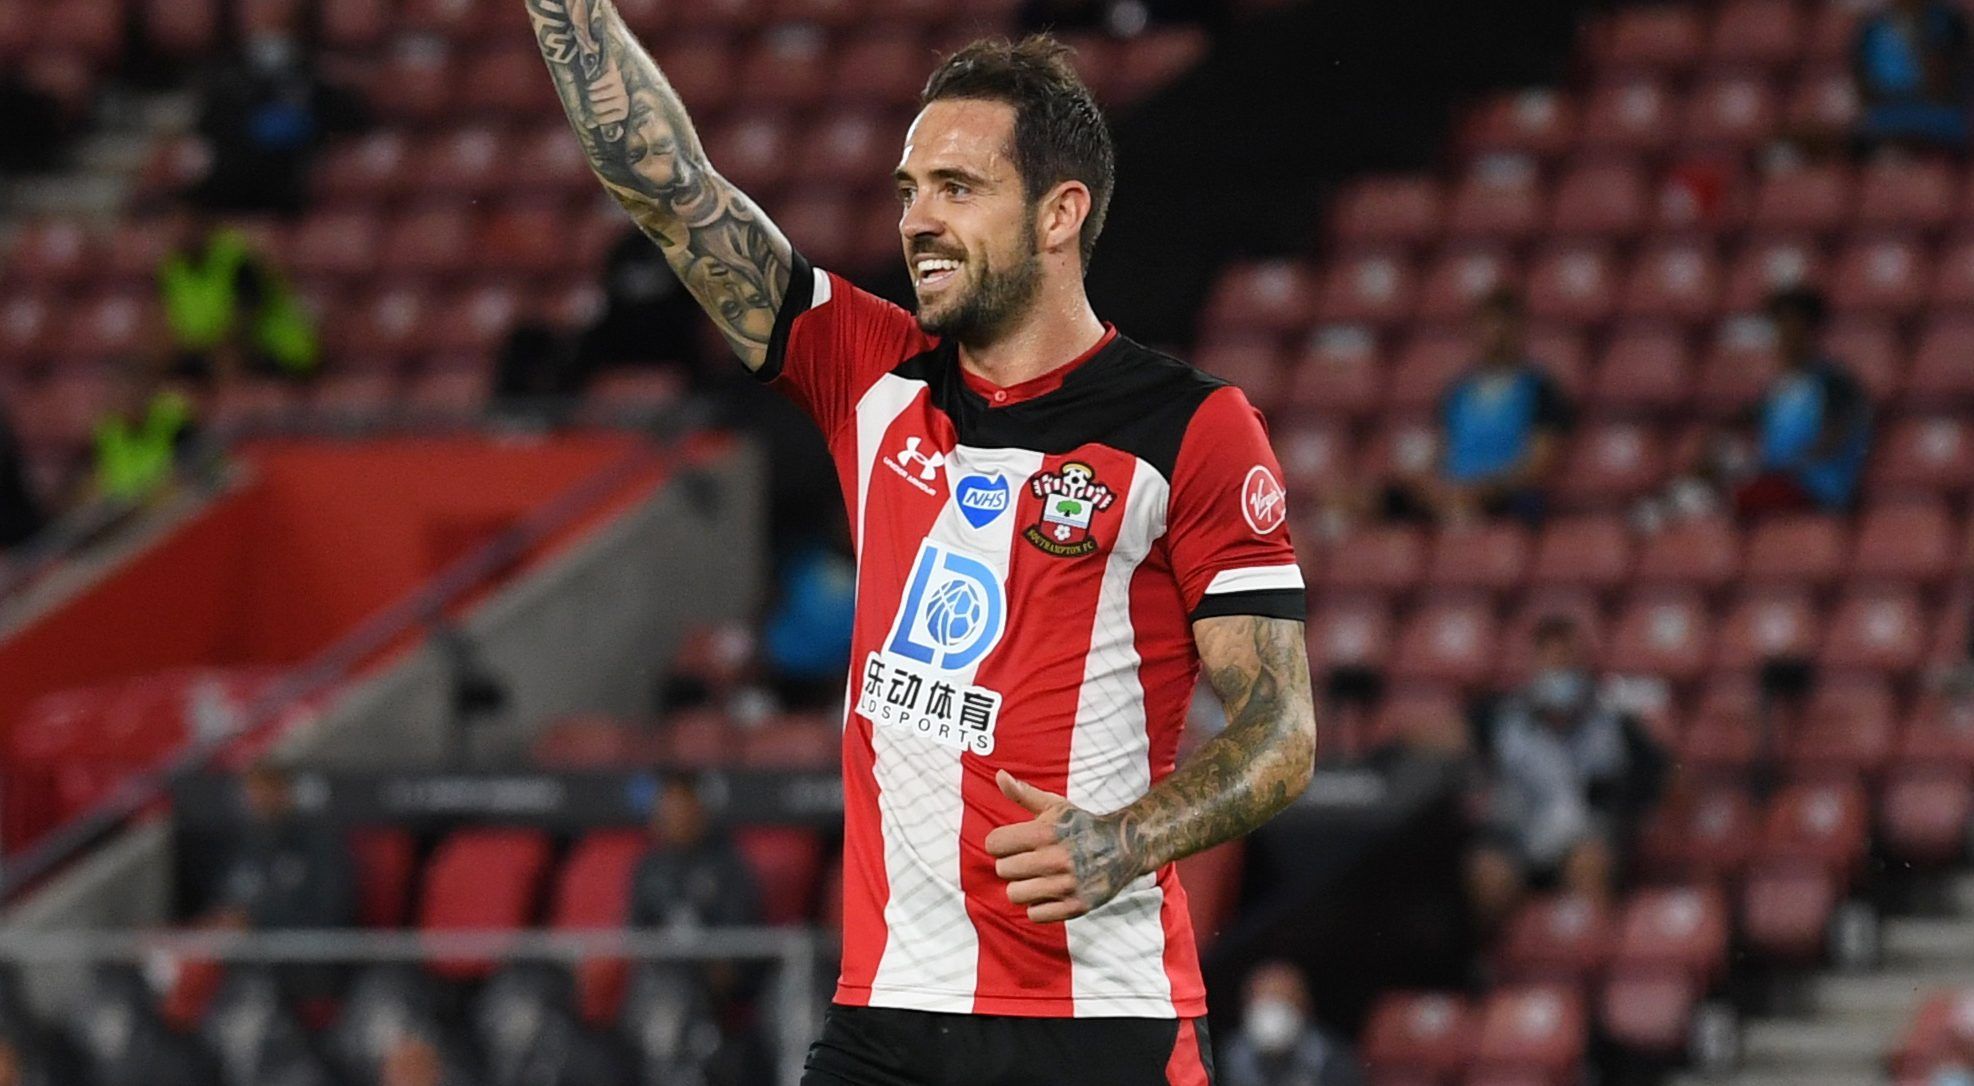 Soccer Football - Premier League - Southampton v Brighton &amp; Hove Albion - St Mary's Stadium, Southampton, Britain - July 16, 2020 Southampton's Danny Ings celebrates scoring their first goal, as play resumes behind closed doors following the outbreak of the coronavirus disease (COVID-19) Pool via REUTERS/Neil Hall EDITORIAL USE ONLY. No use with unauthorized audio, video, data, fixture lists, club/league logos or 'live' services. Online in-match use limited to 75 images, no video emulation. 